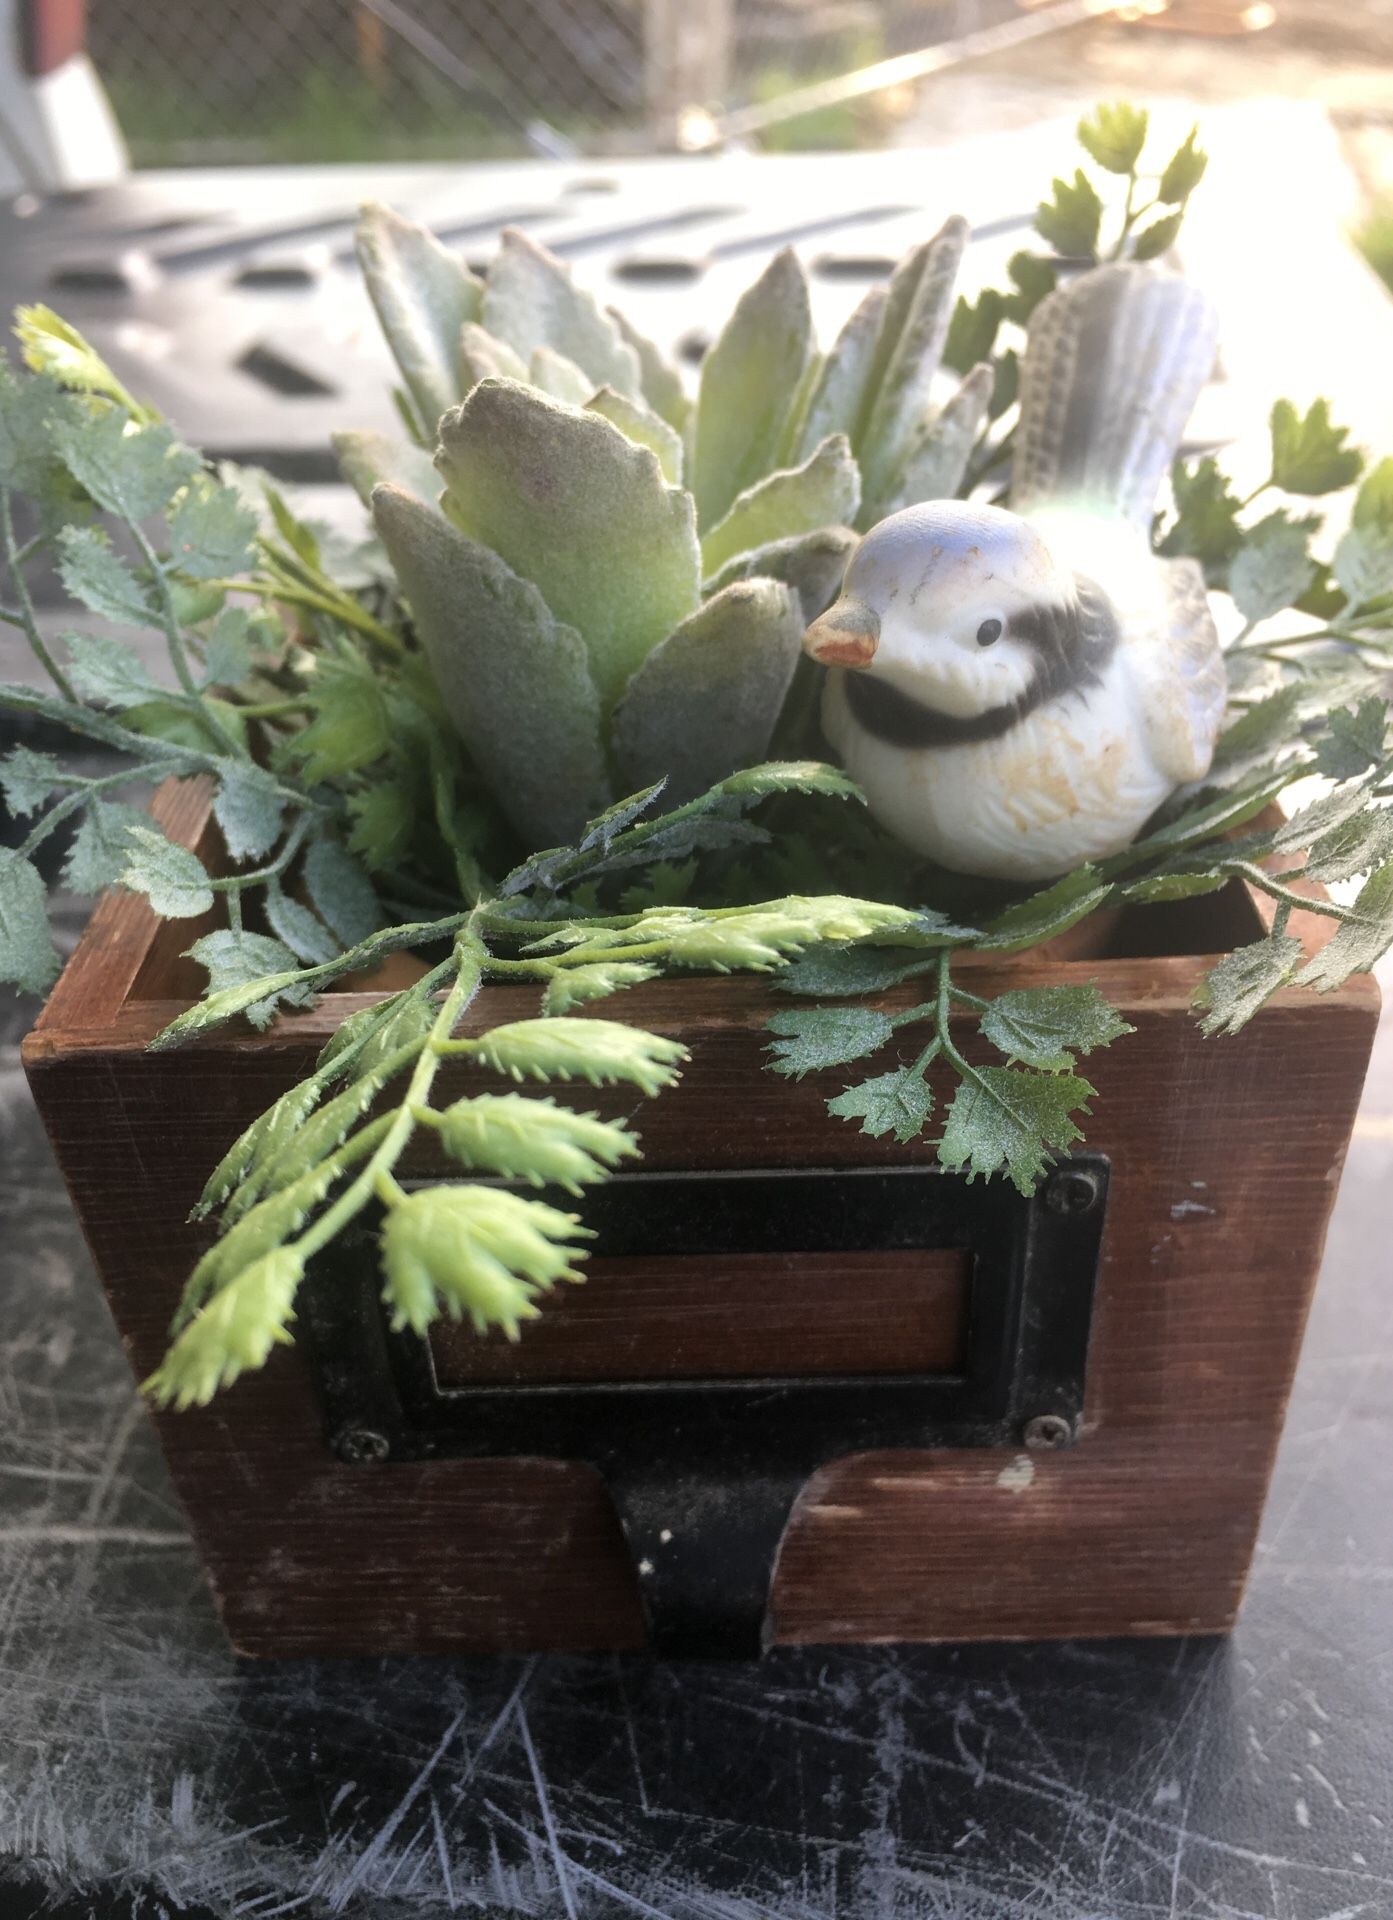 4”x3” wooden drawer with artificial plant and succulent in cute little file drawer